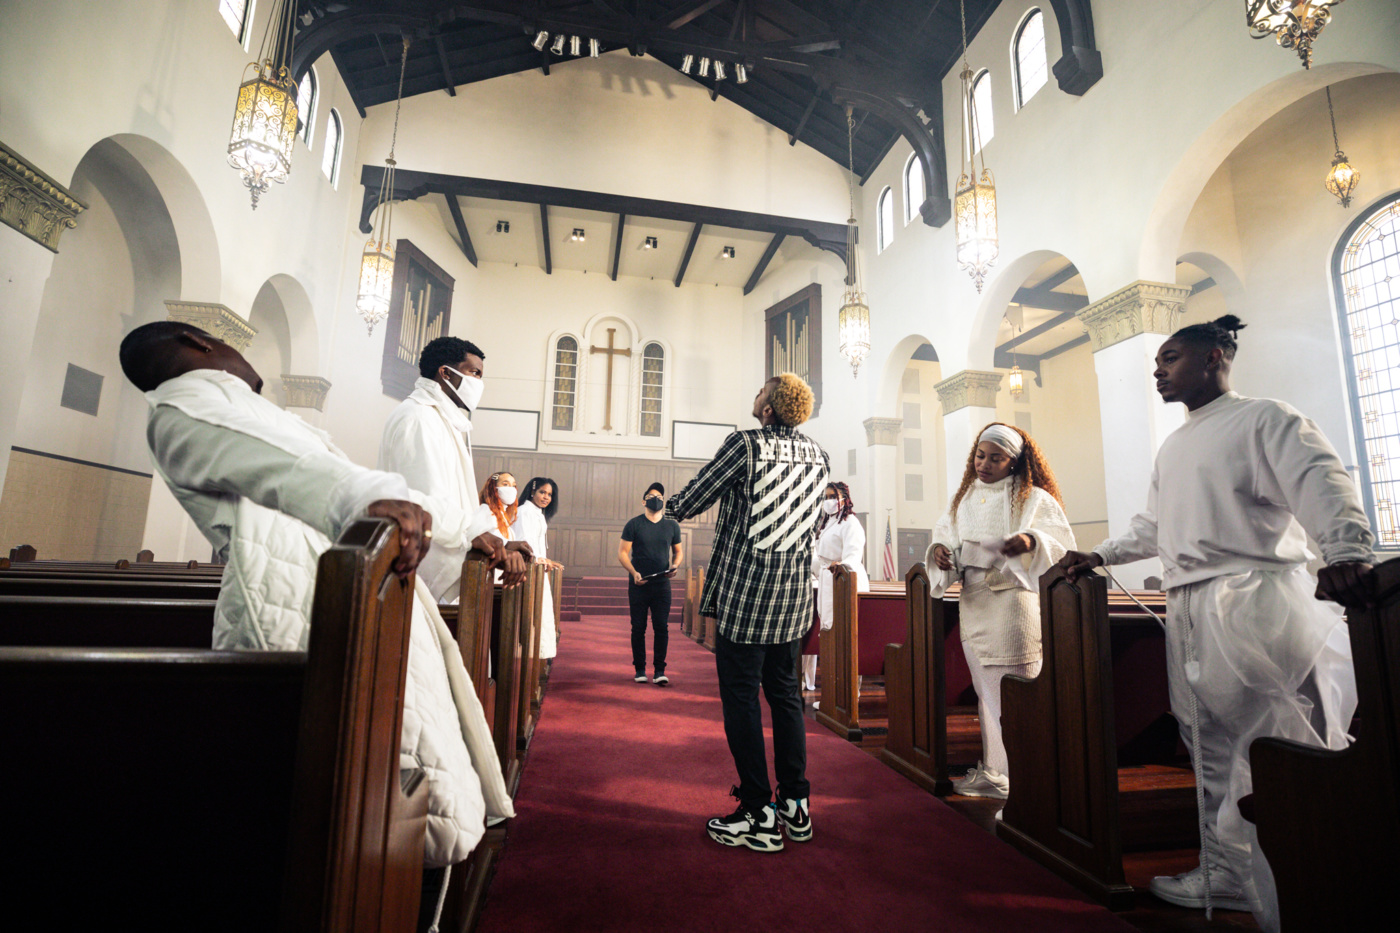 Lil Buck stands surrounded by church choir members dressed all in white between church pews.